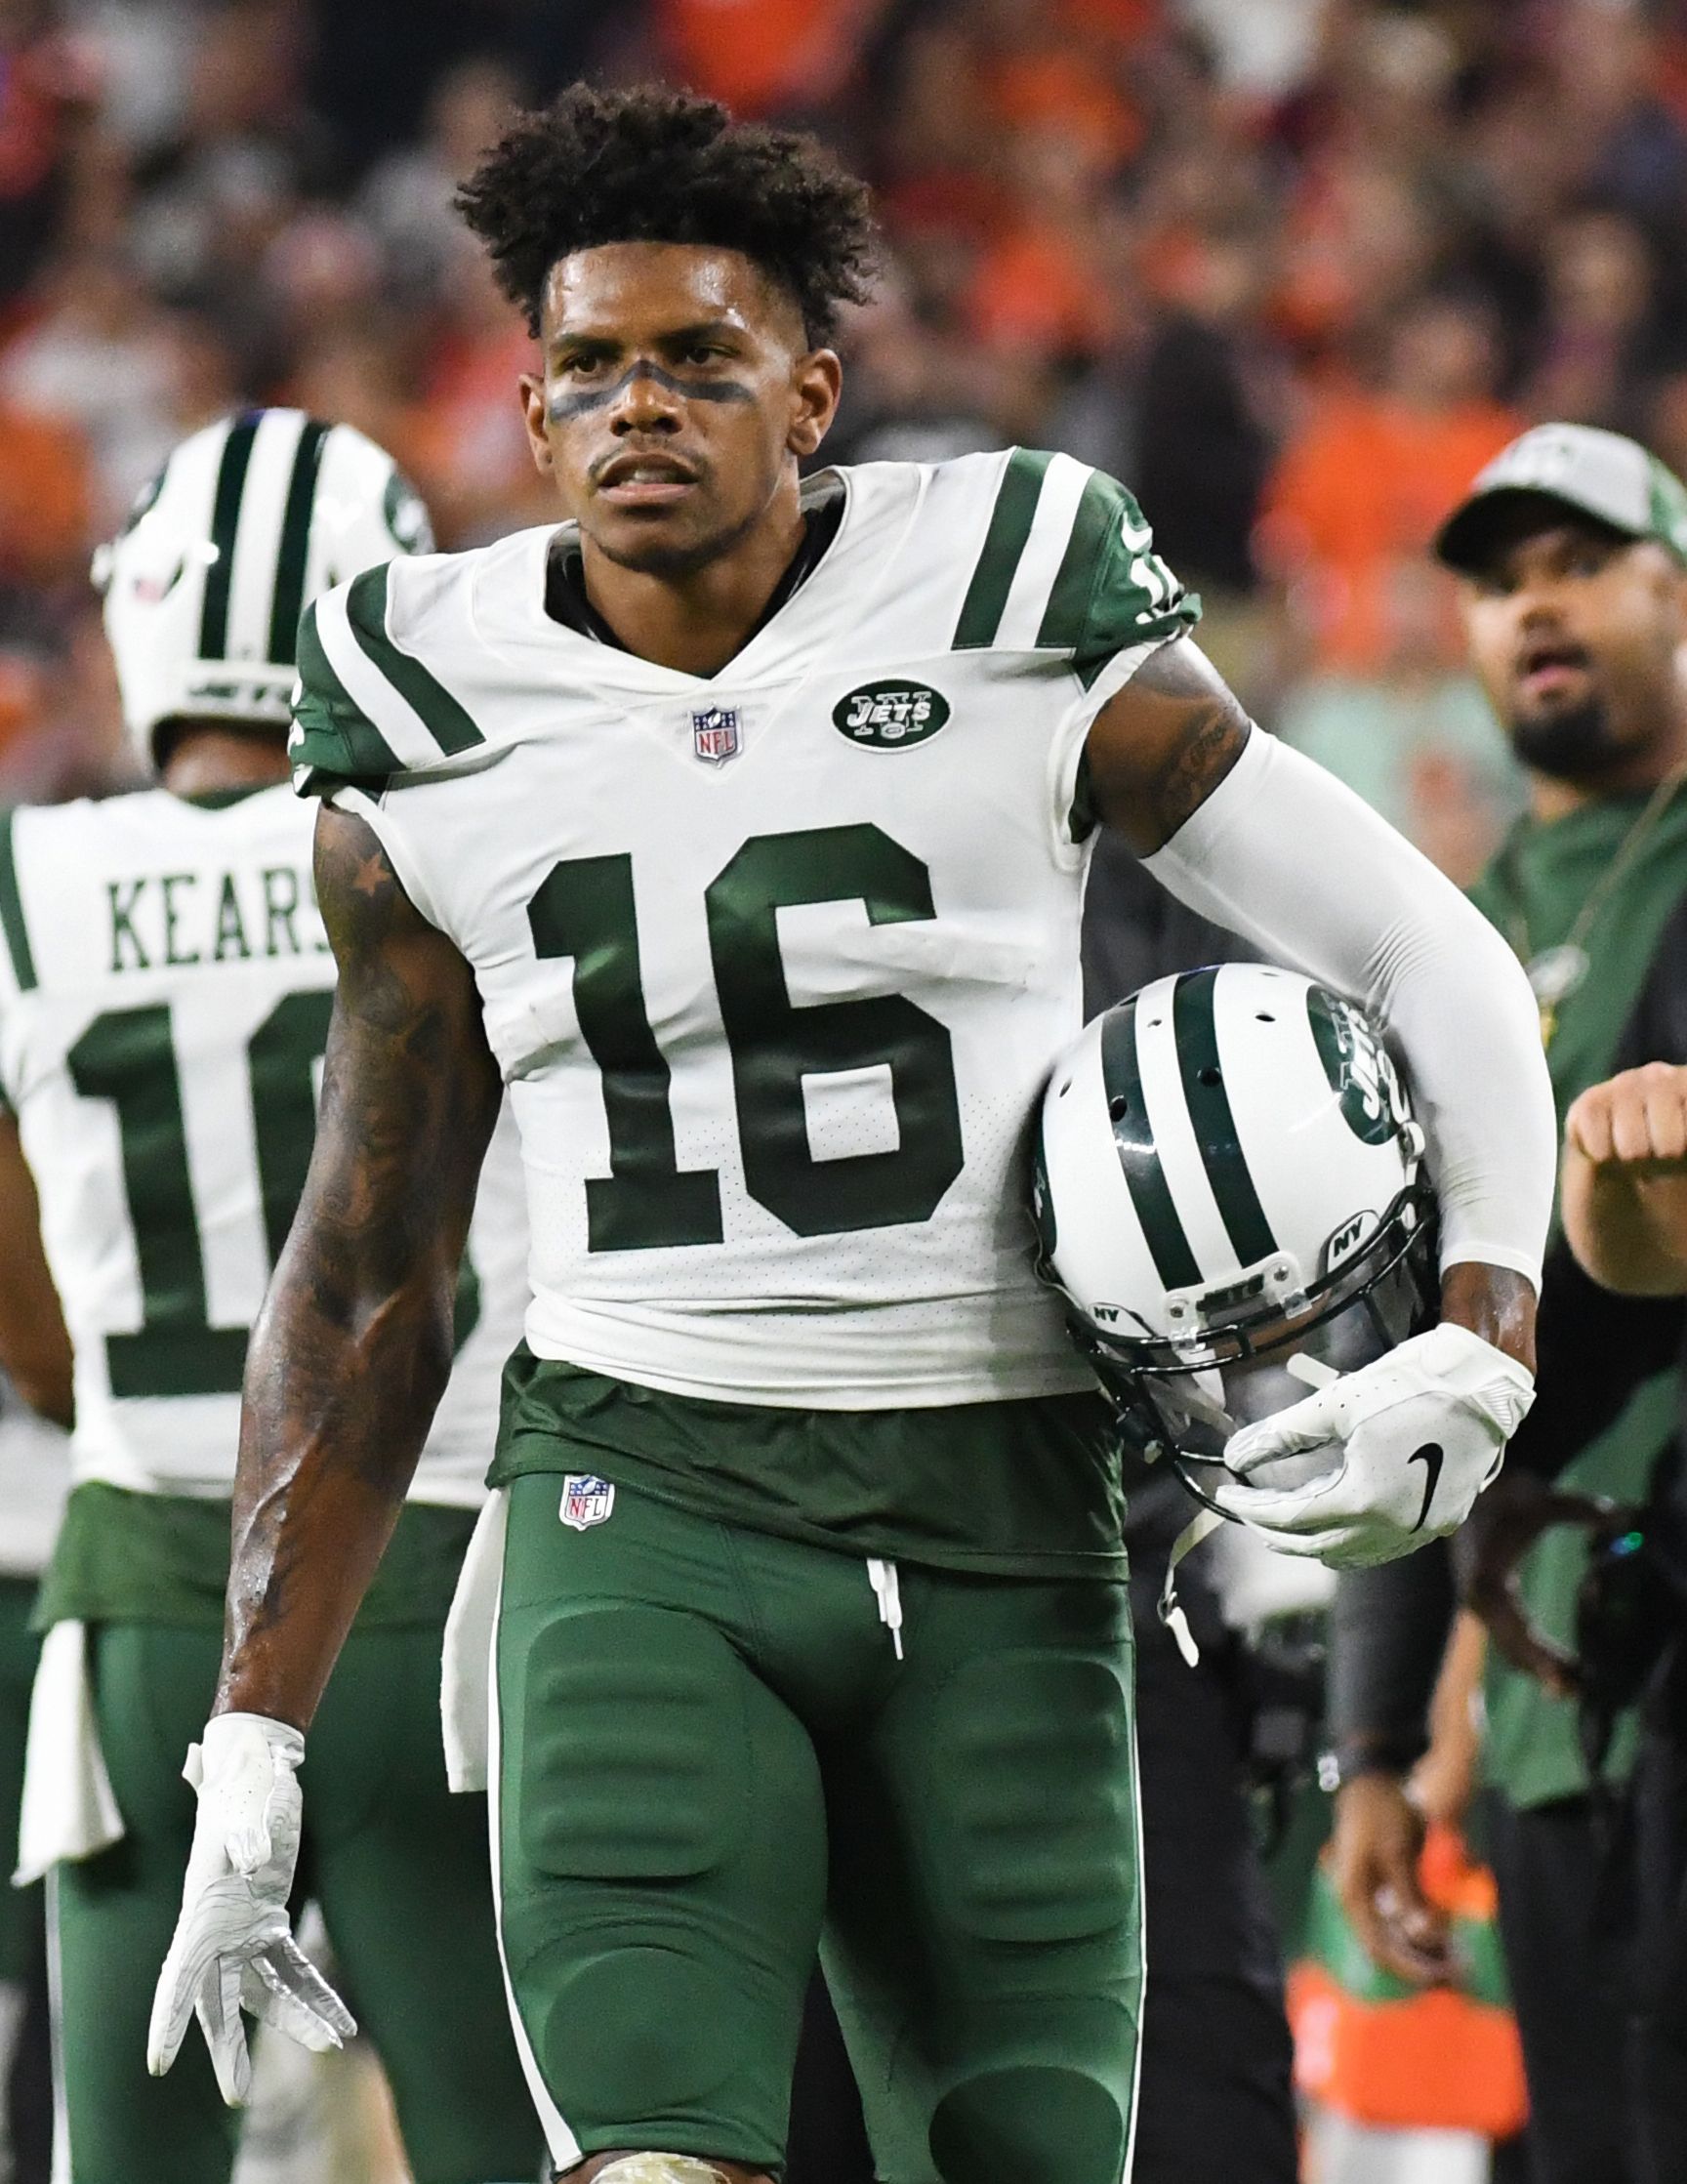 Terrelle Pryor #16 of the New York Jets greets teammates on the sidelines in a game against the Cleveland Browns on September 20, 2018 at FirstEnergy Stadium in Cleveland, Ohio. | Source: Getty Images